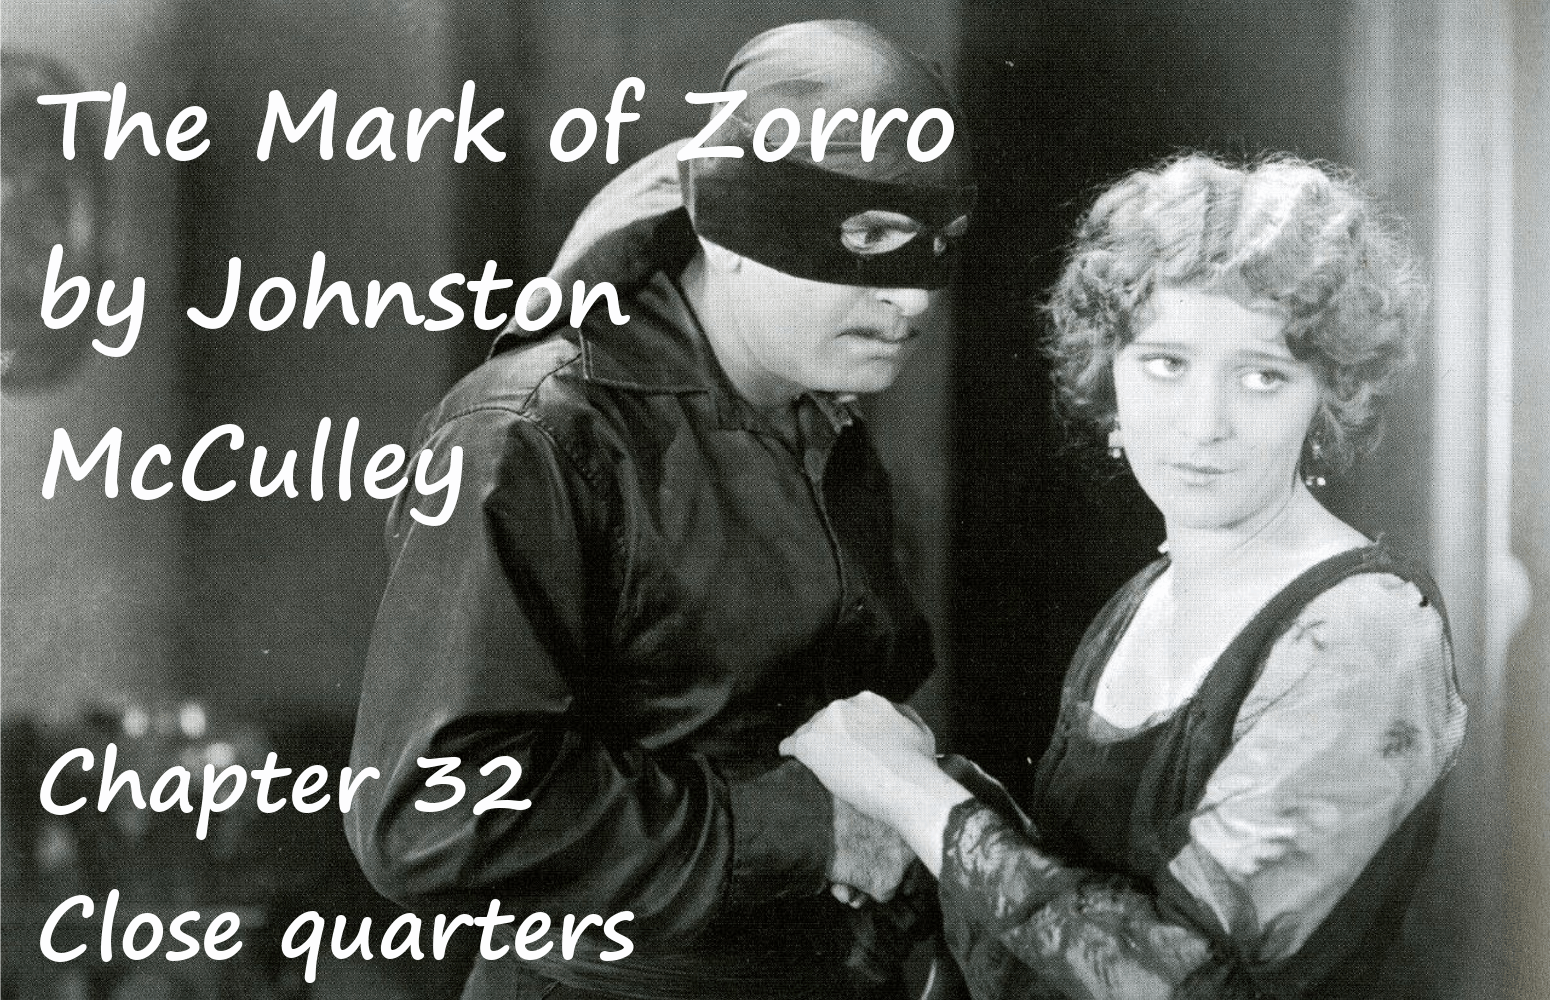 The Mark of Zorro chapter 32 Close quarters by Johnston McCulley